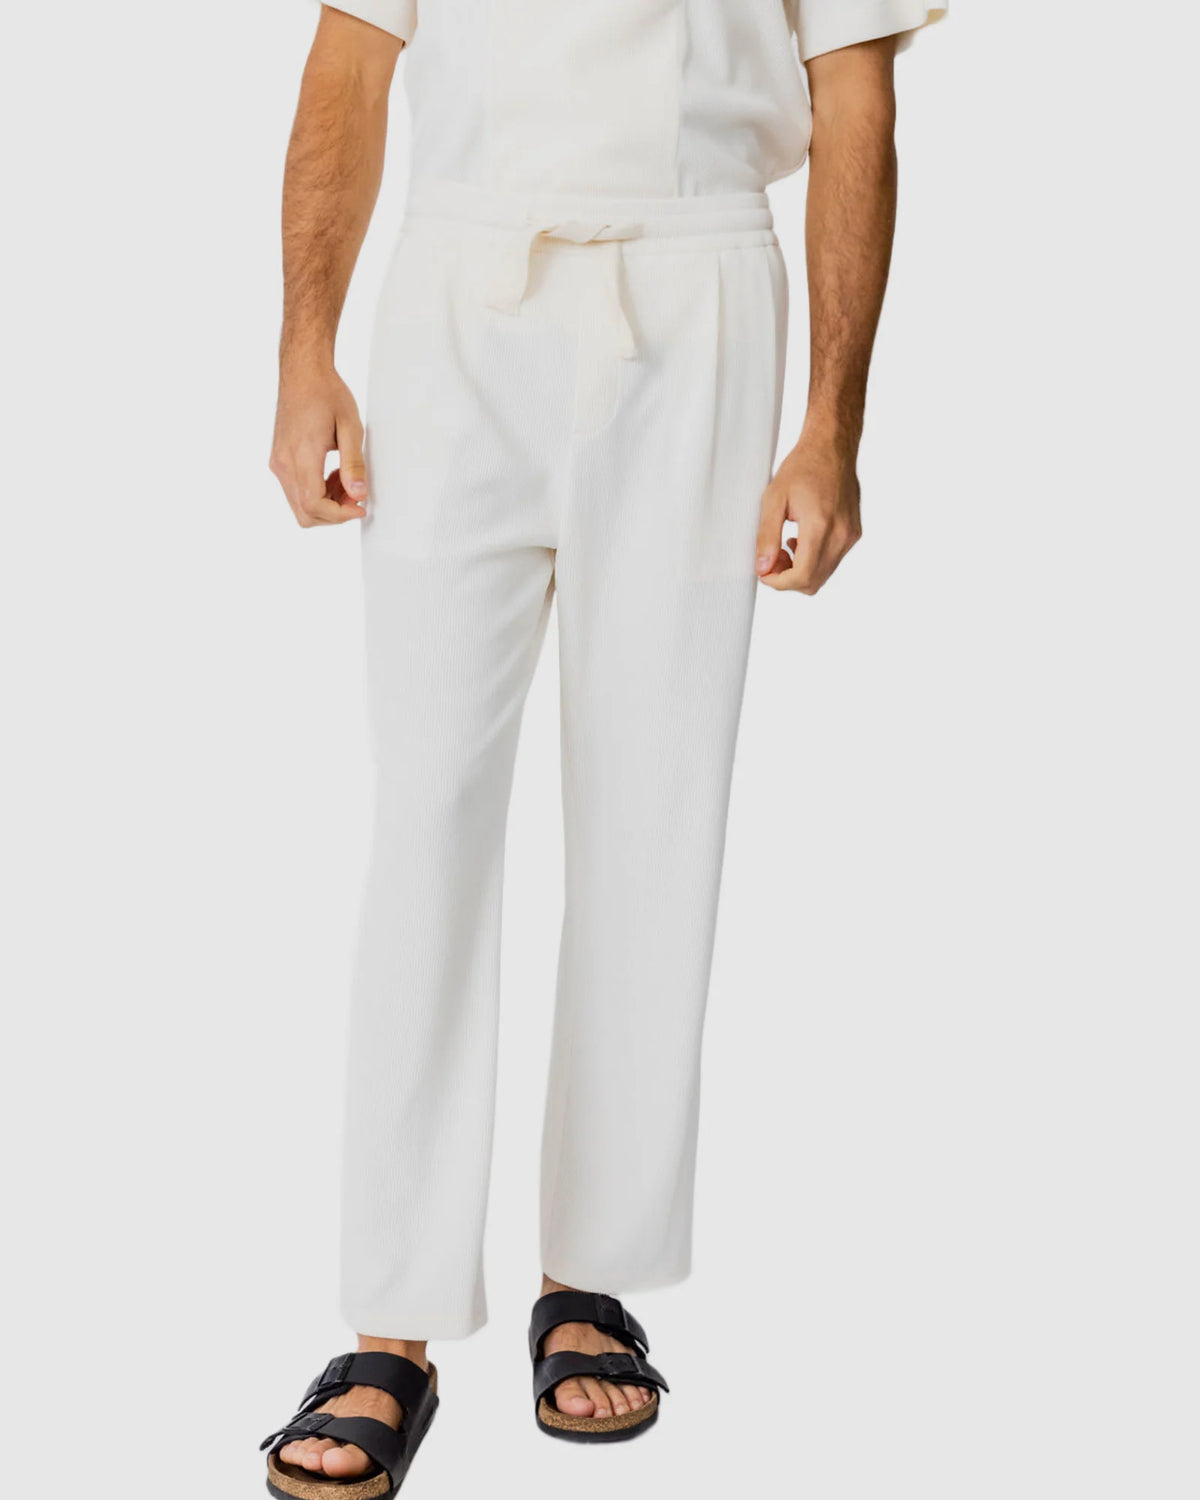 Justin Cassin Palma Loose Ribbed Pant in Cream Color